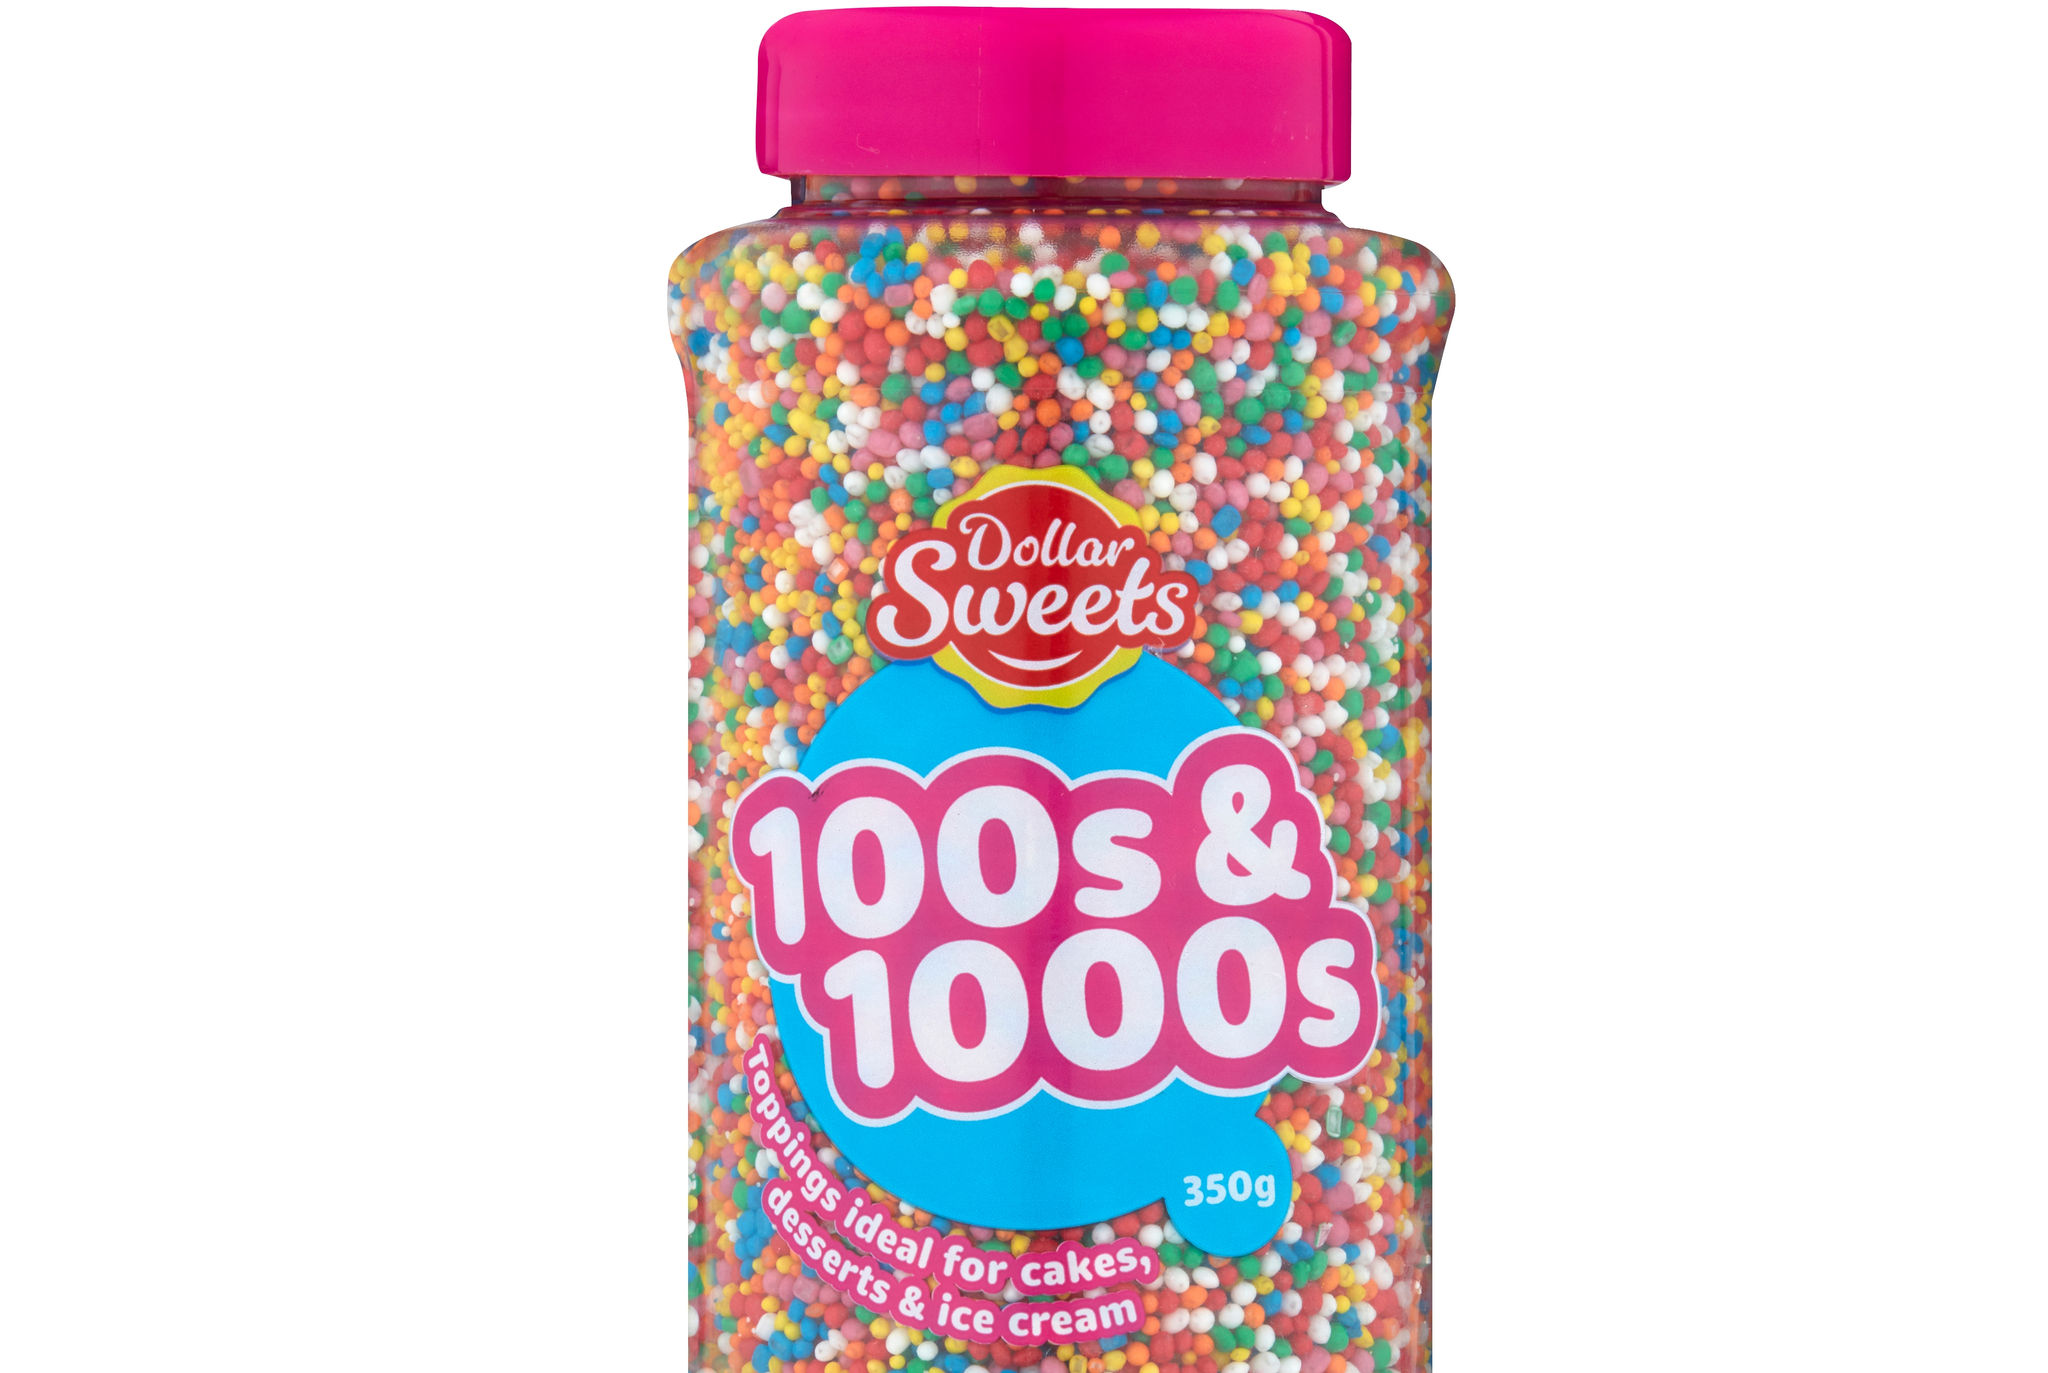 Photograph of Dollar Sweets 100s and 1000s container